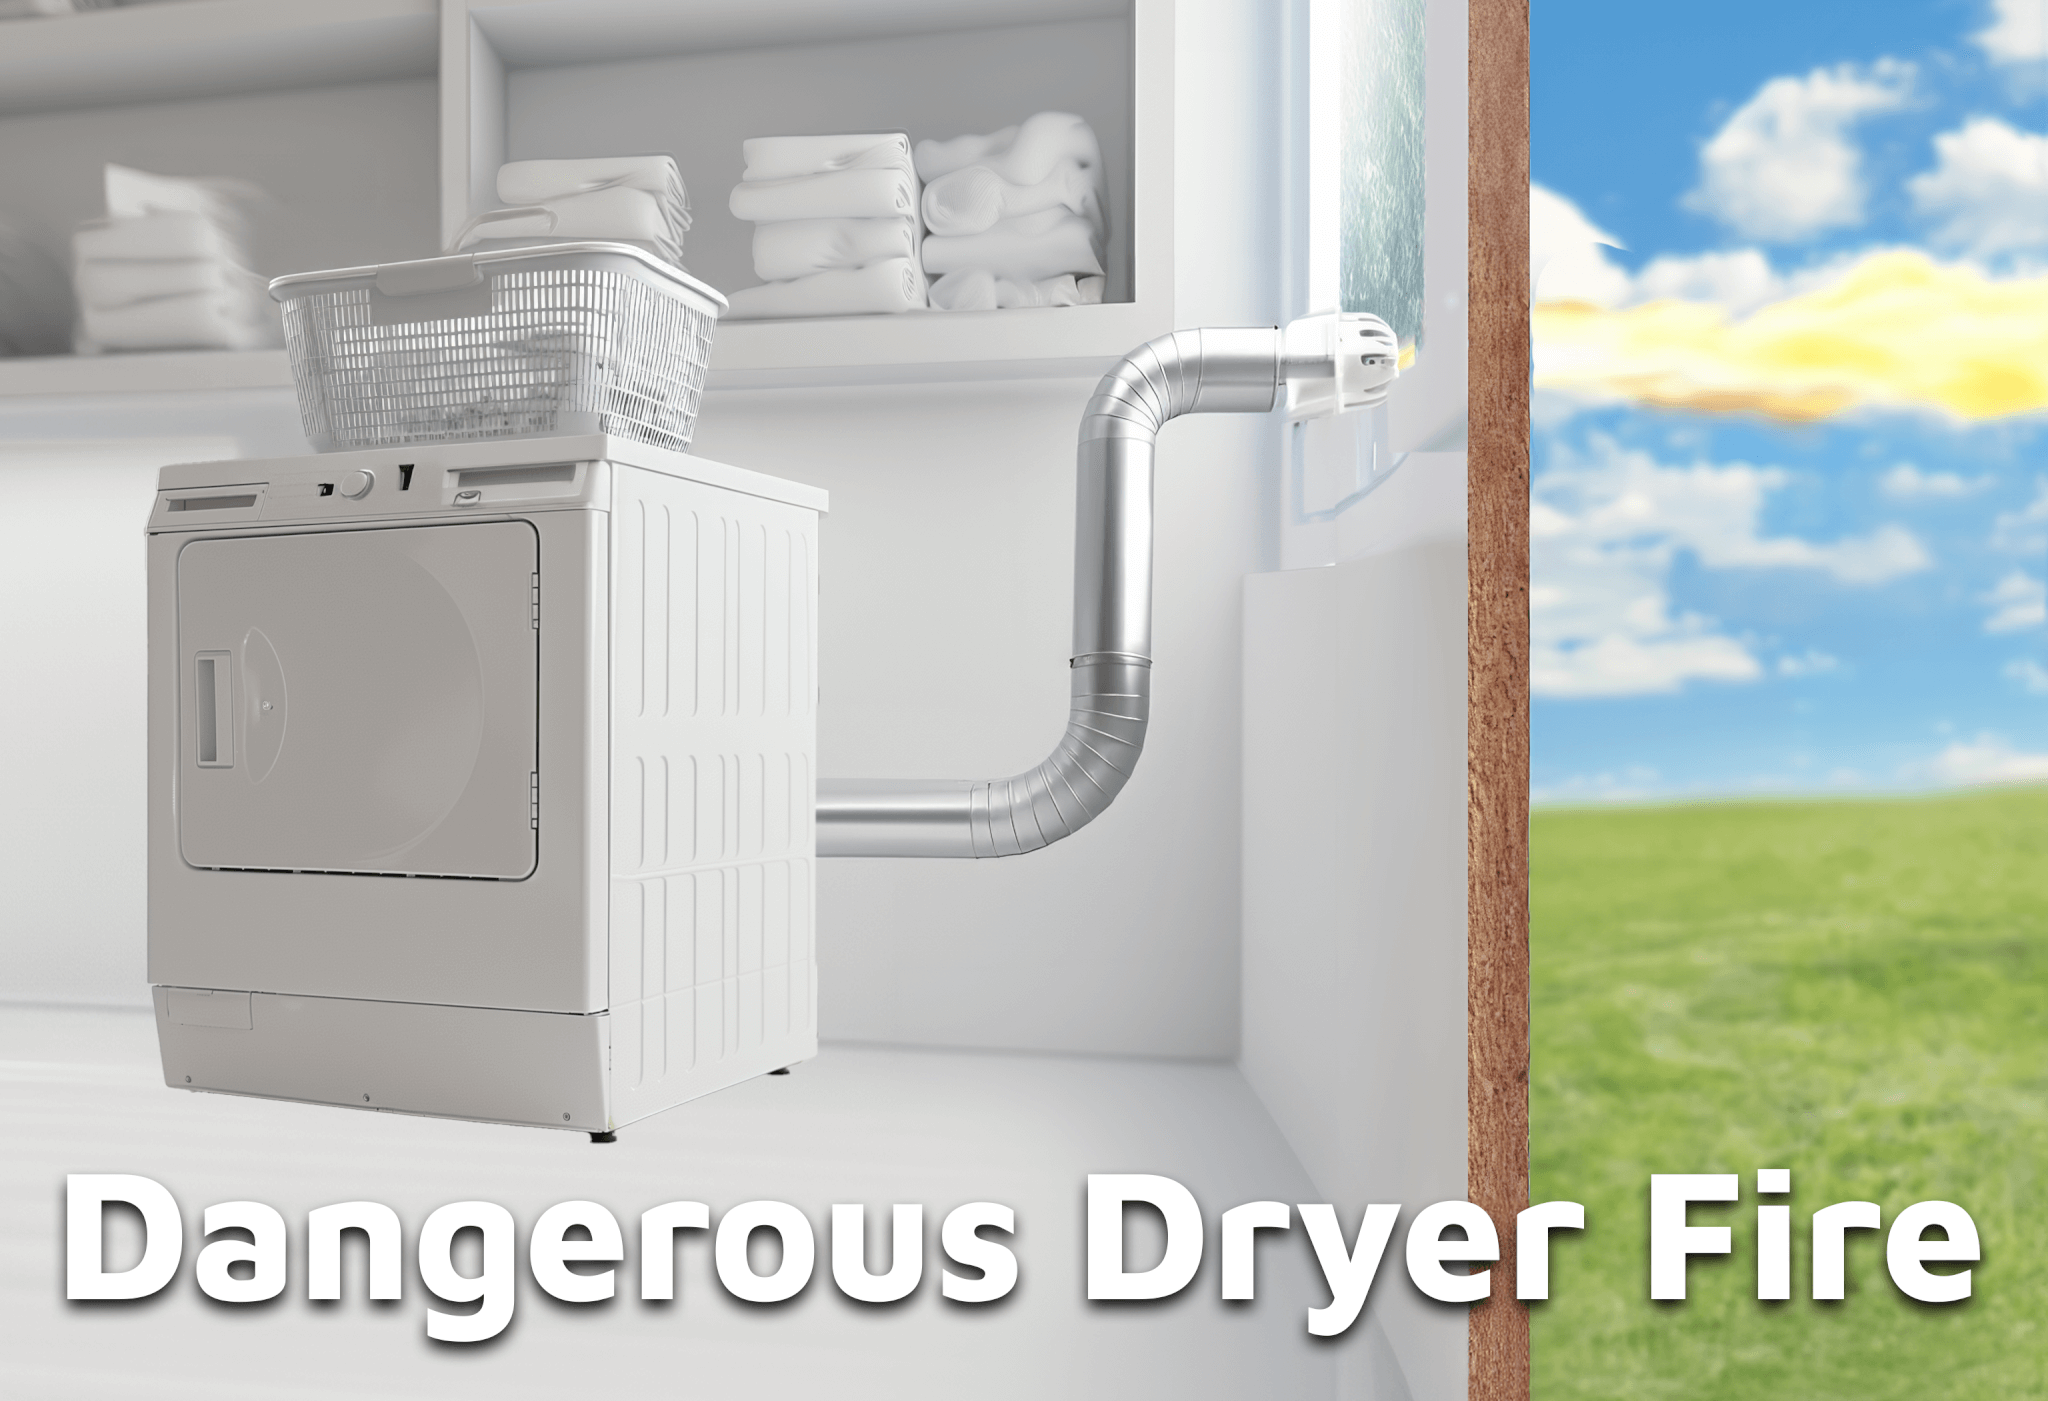 Dryer Fires Are Preventable